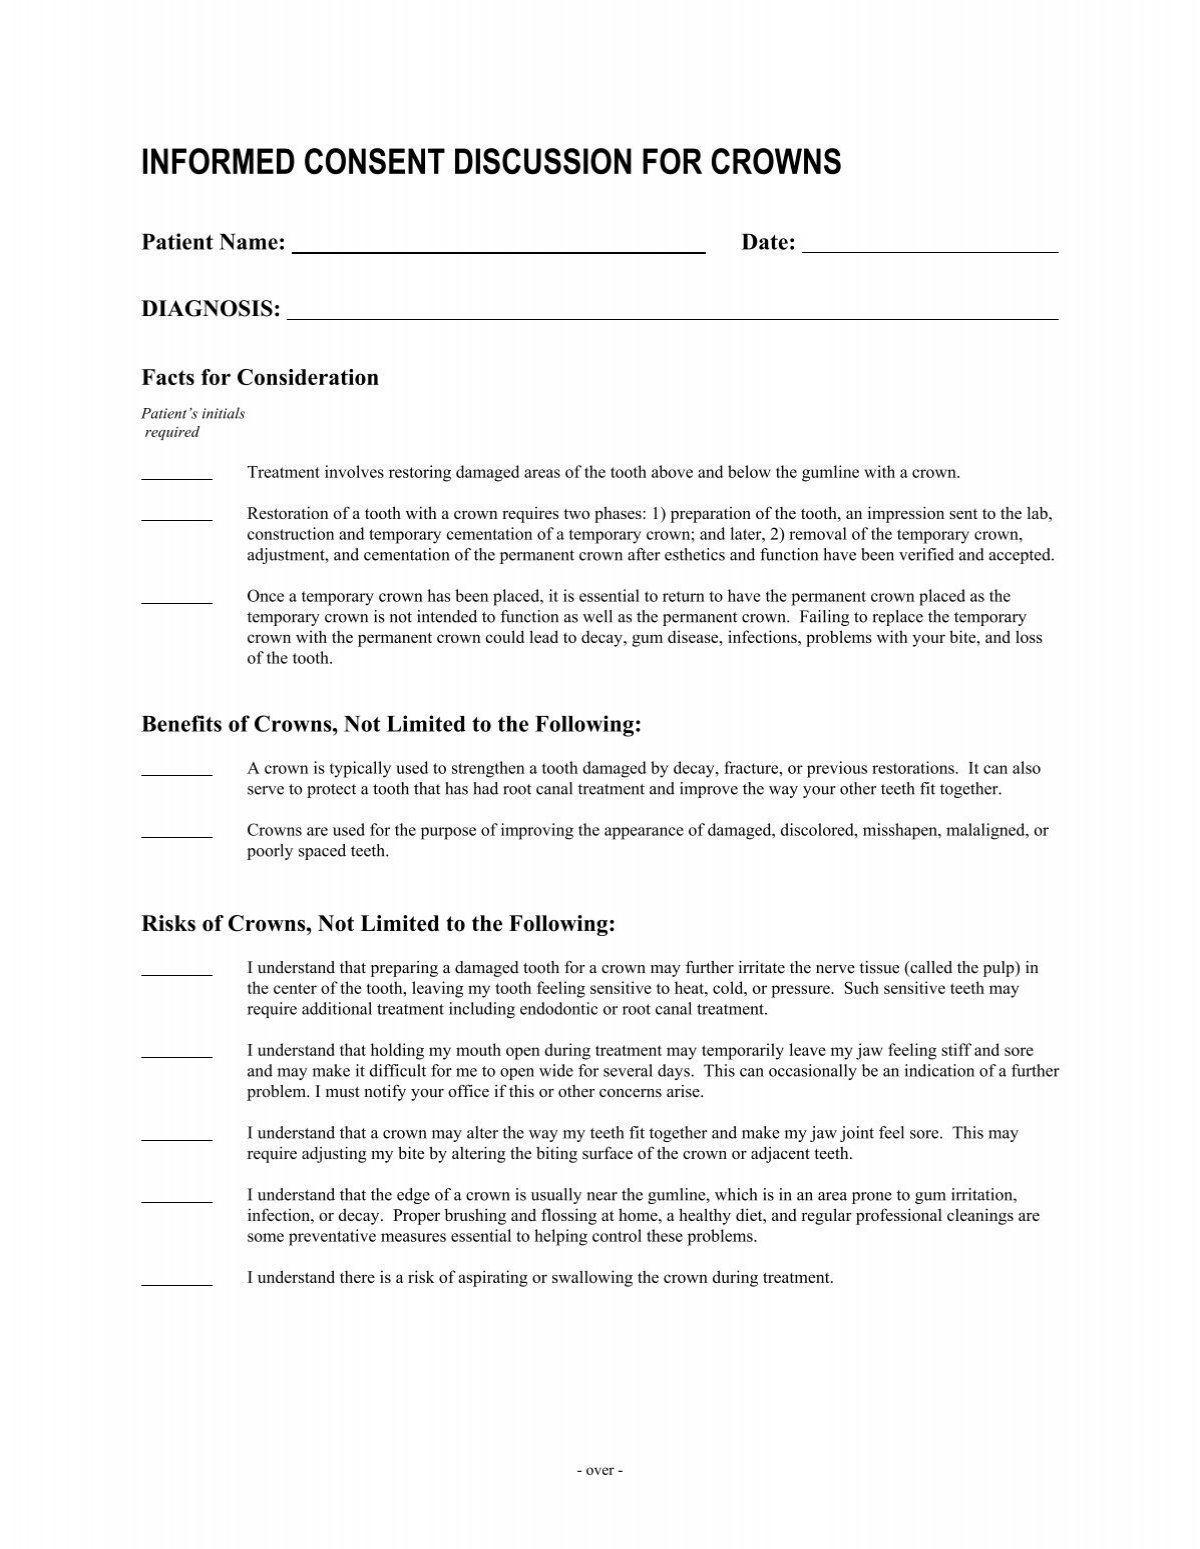 Implant Crown Consent Form